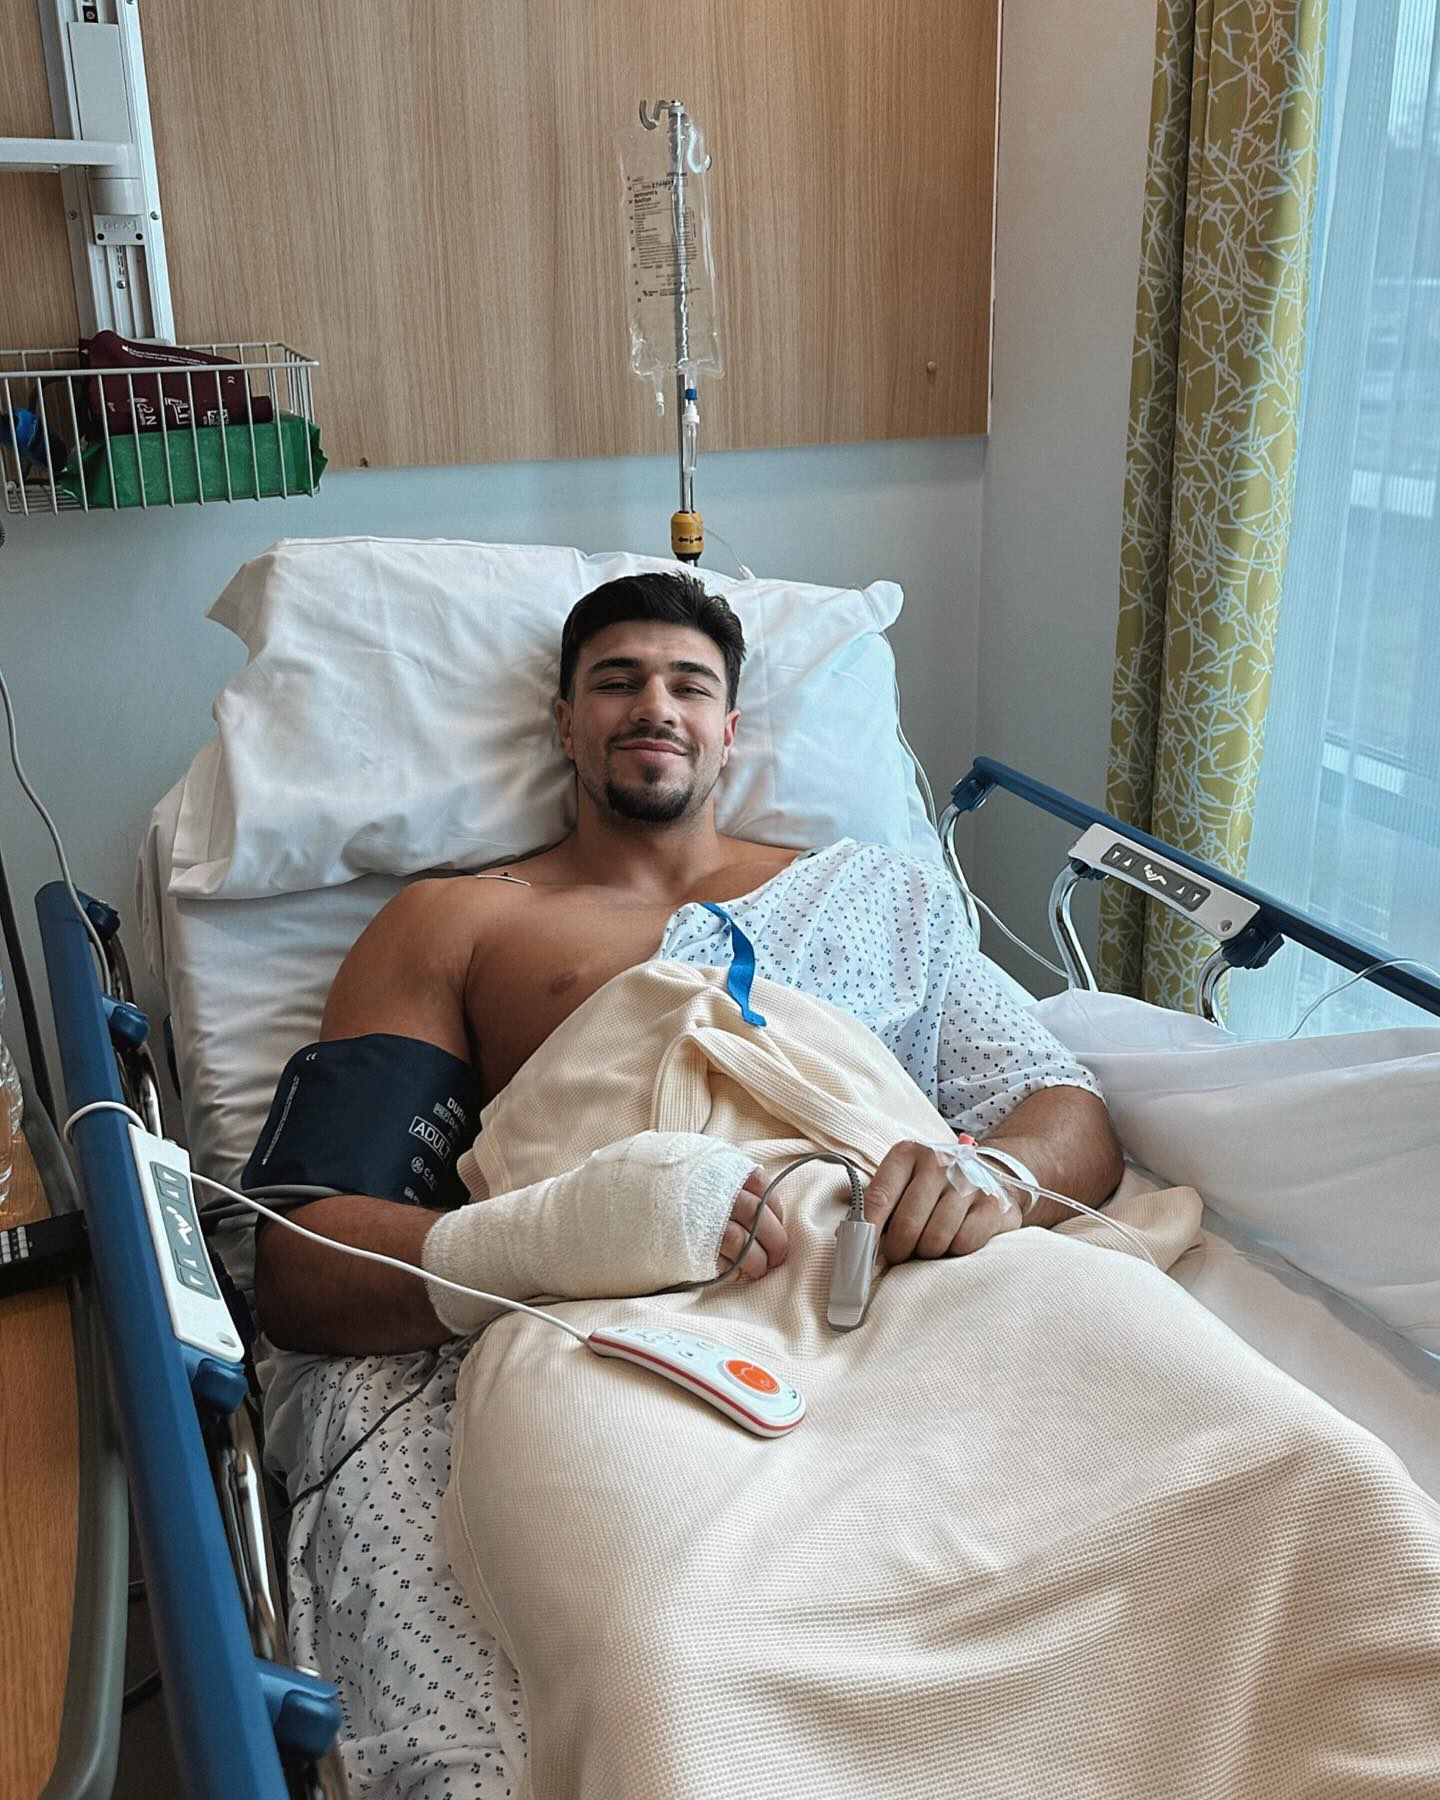 Tommy Fury underwent surgery to fix a hand injury